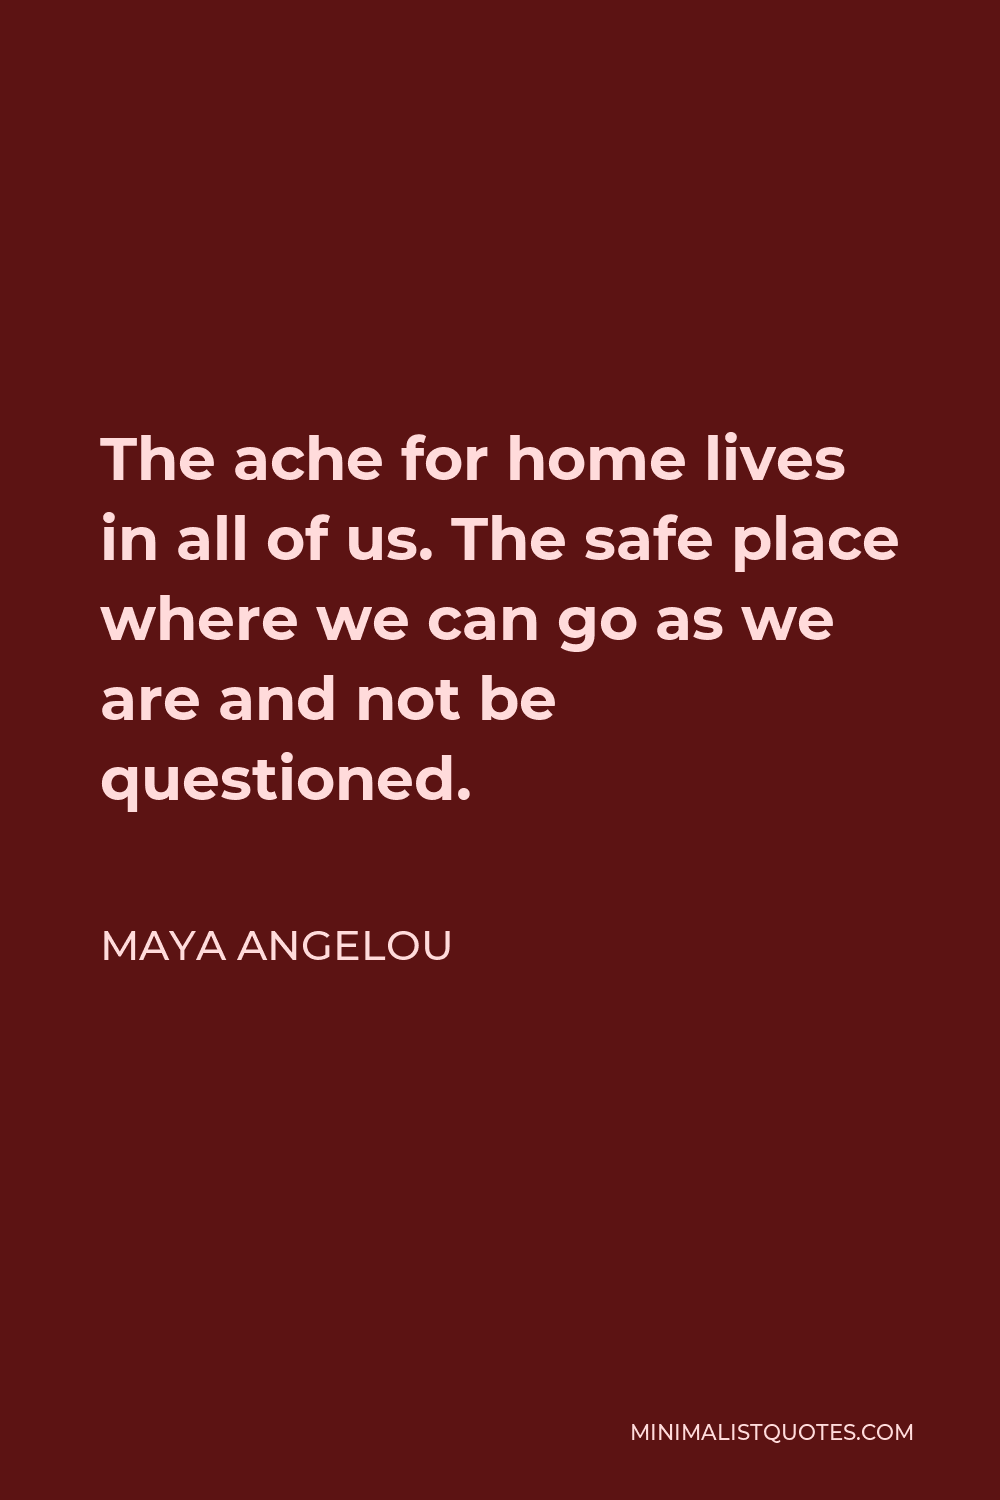 Maya Angelou Quote - The ache for home lives in all of us. The safe place where we can go as we are and not be questioned.